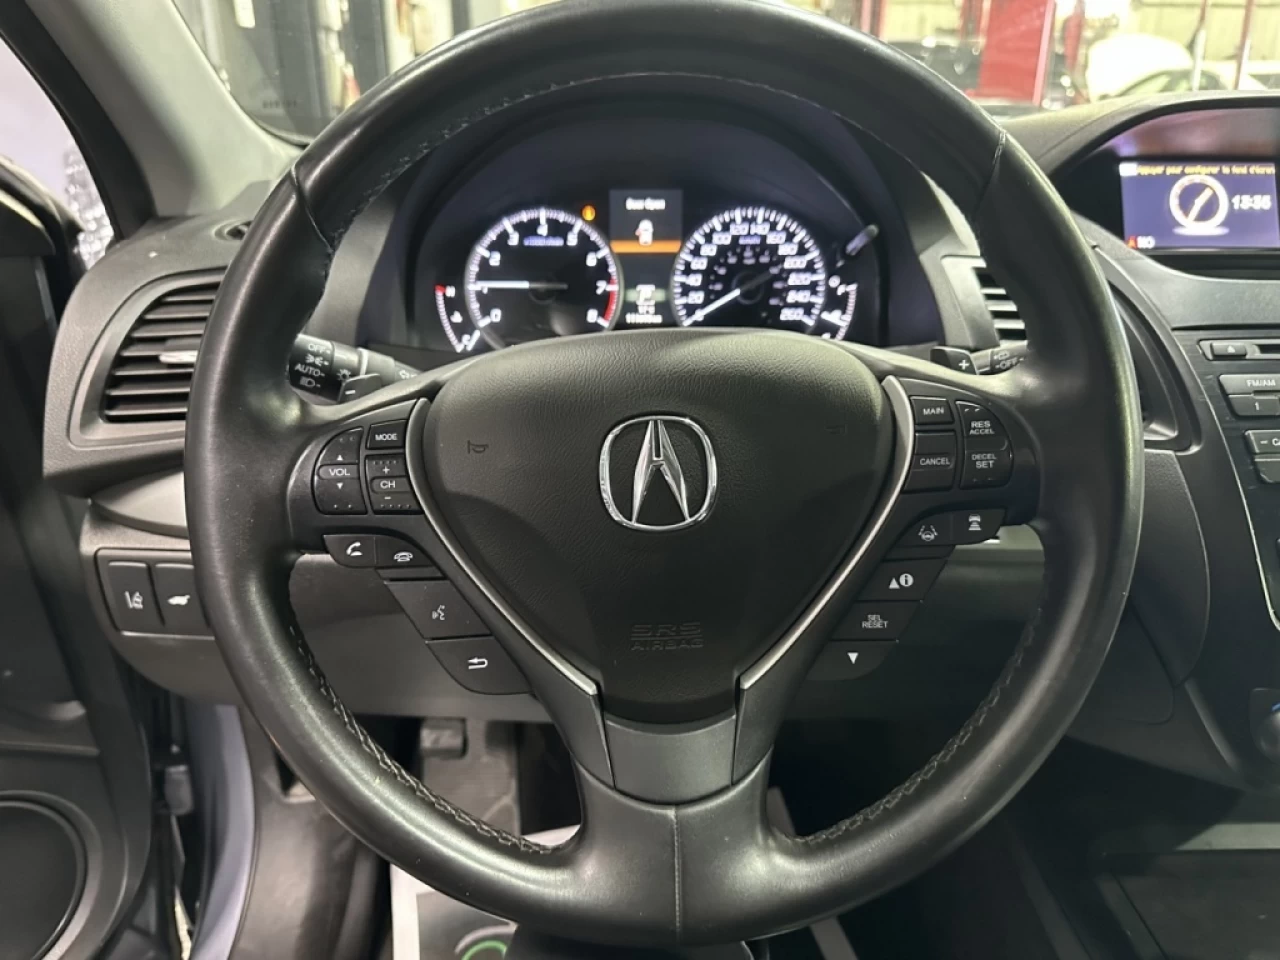 2016 Acura RDX TECH AWD FULL CUIR TOIT SEULEMENT 111 6000KM Image principale